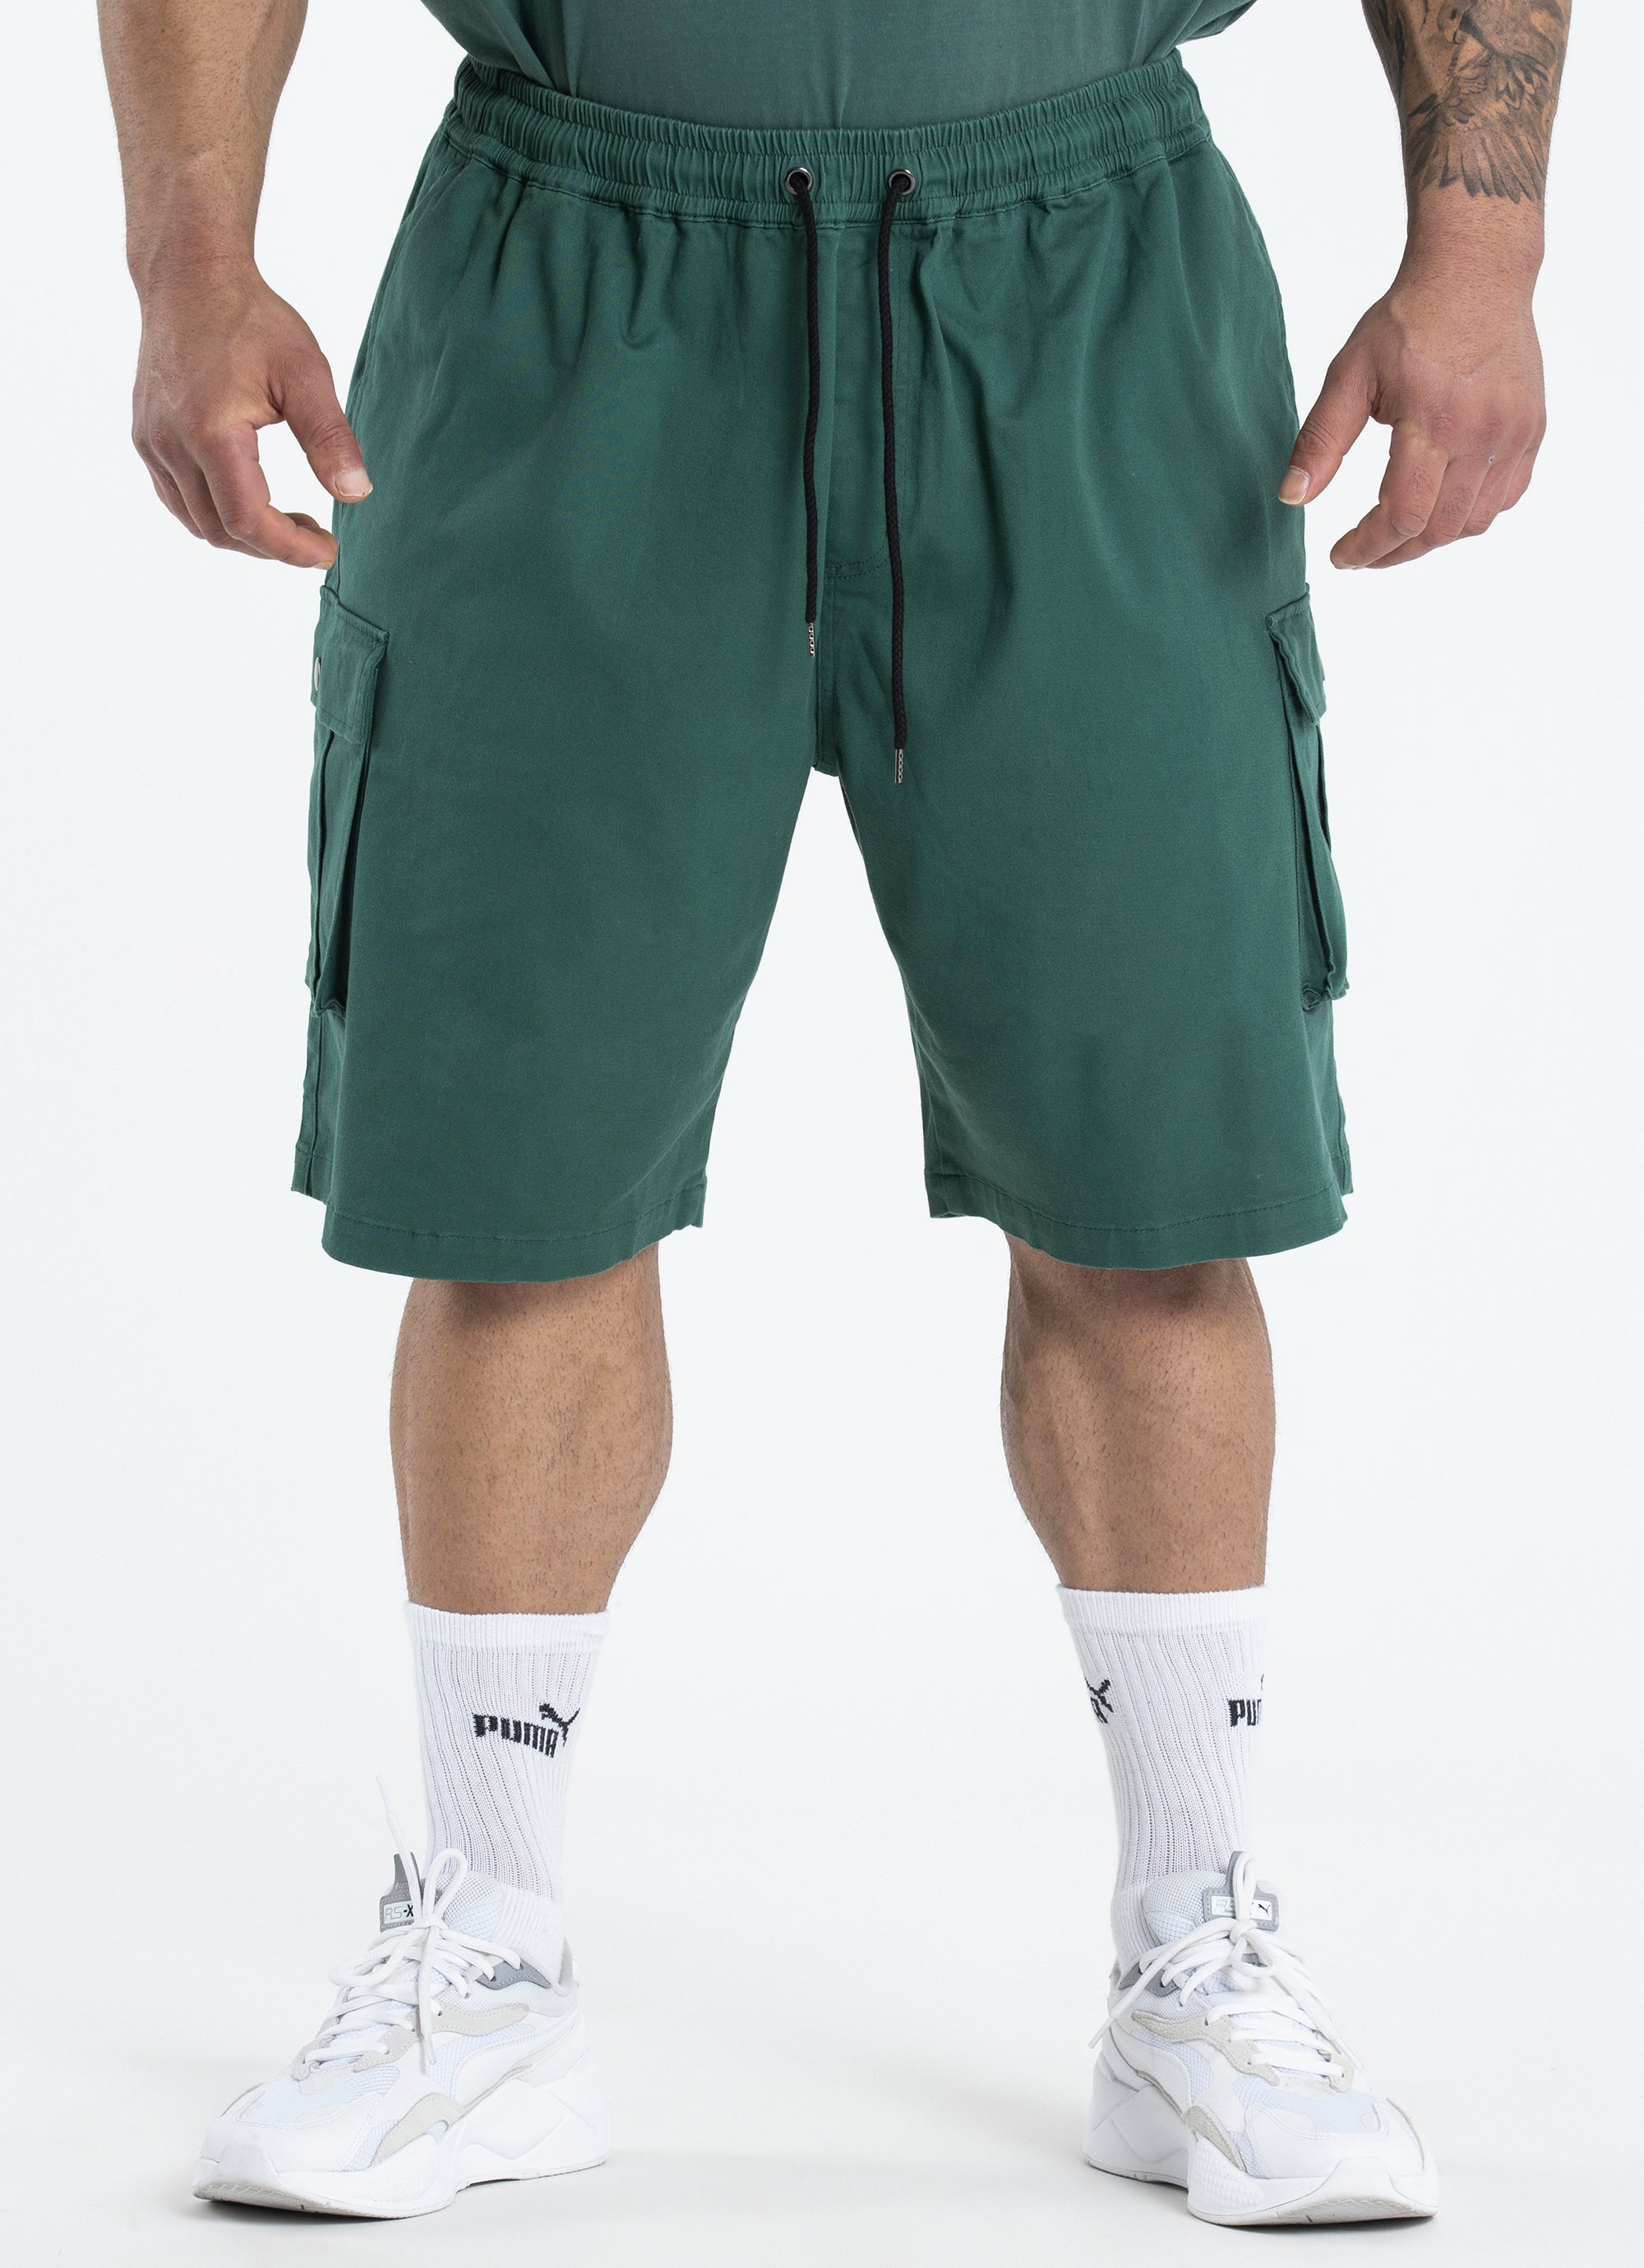 Stmnt Cargo Shorts - Big & Tall in Unknown | Red Rat